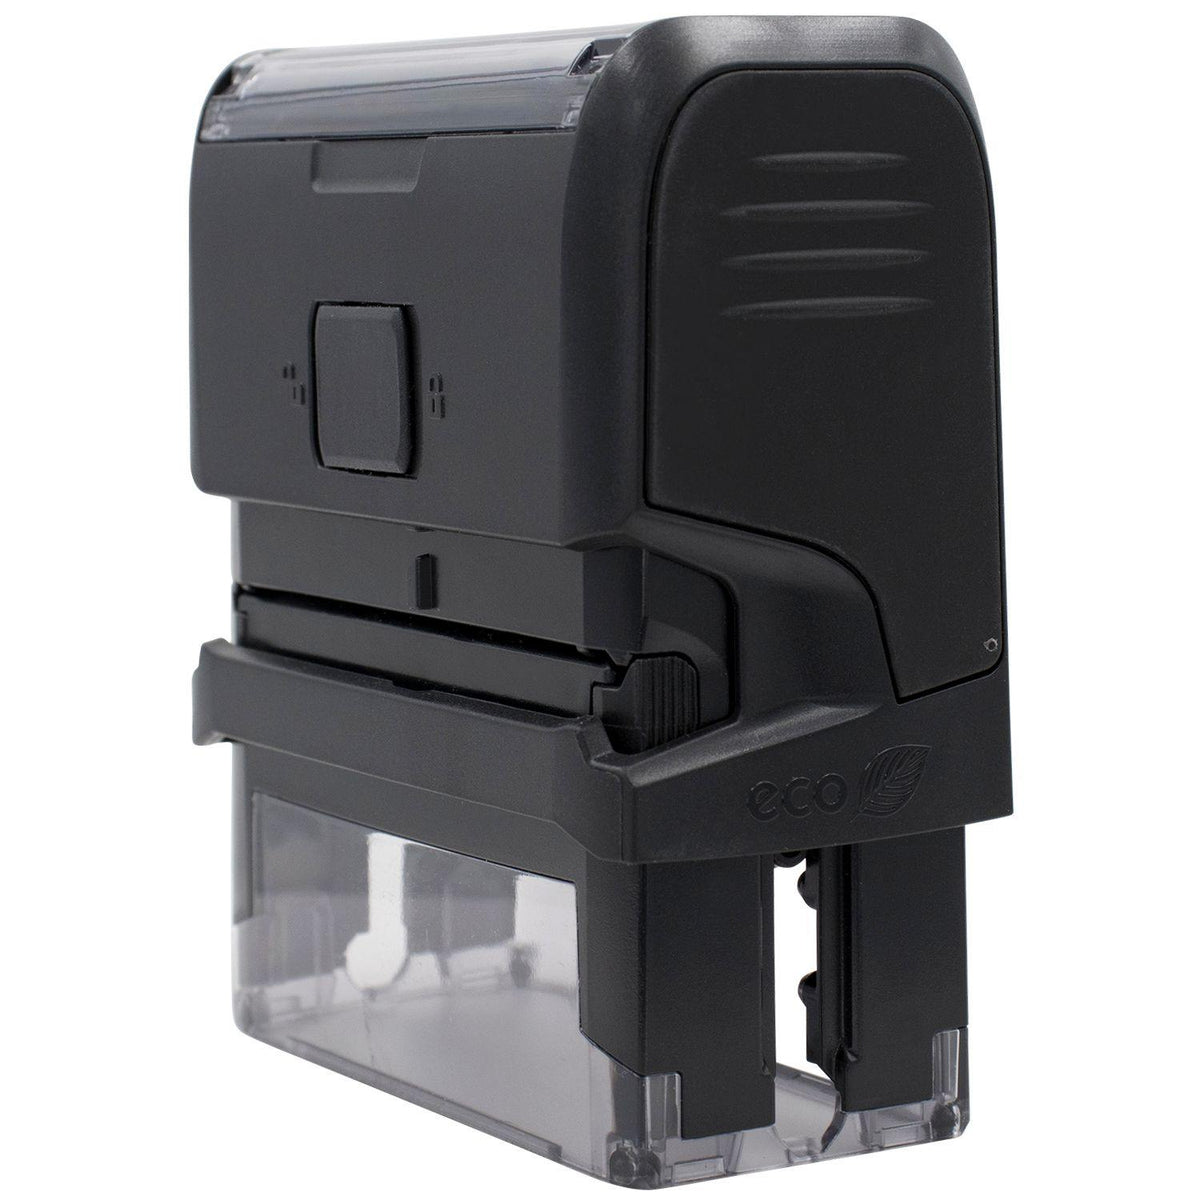 Self-Inking Check Your Work Stamp - Engineer Seal Stamps - Brand_Trodat, Impression Size_Small, Stamp Type_Self-Inking Stamp, Type of Use_Office, Type of Use_Postal &amp; Mailing